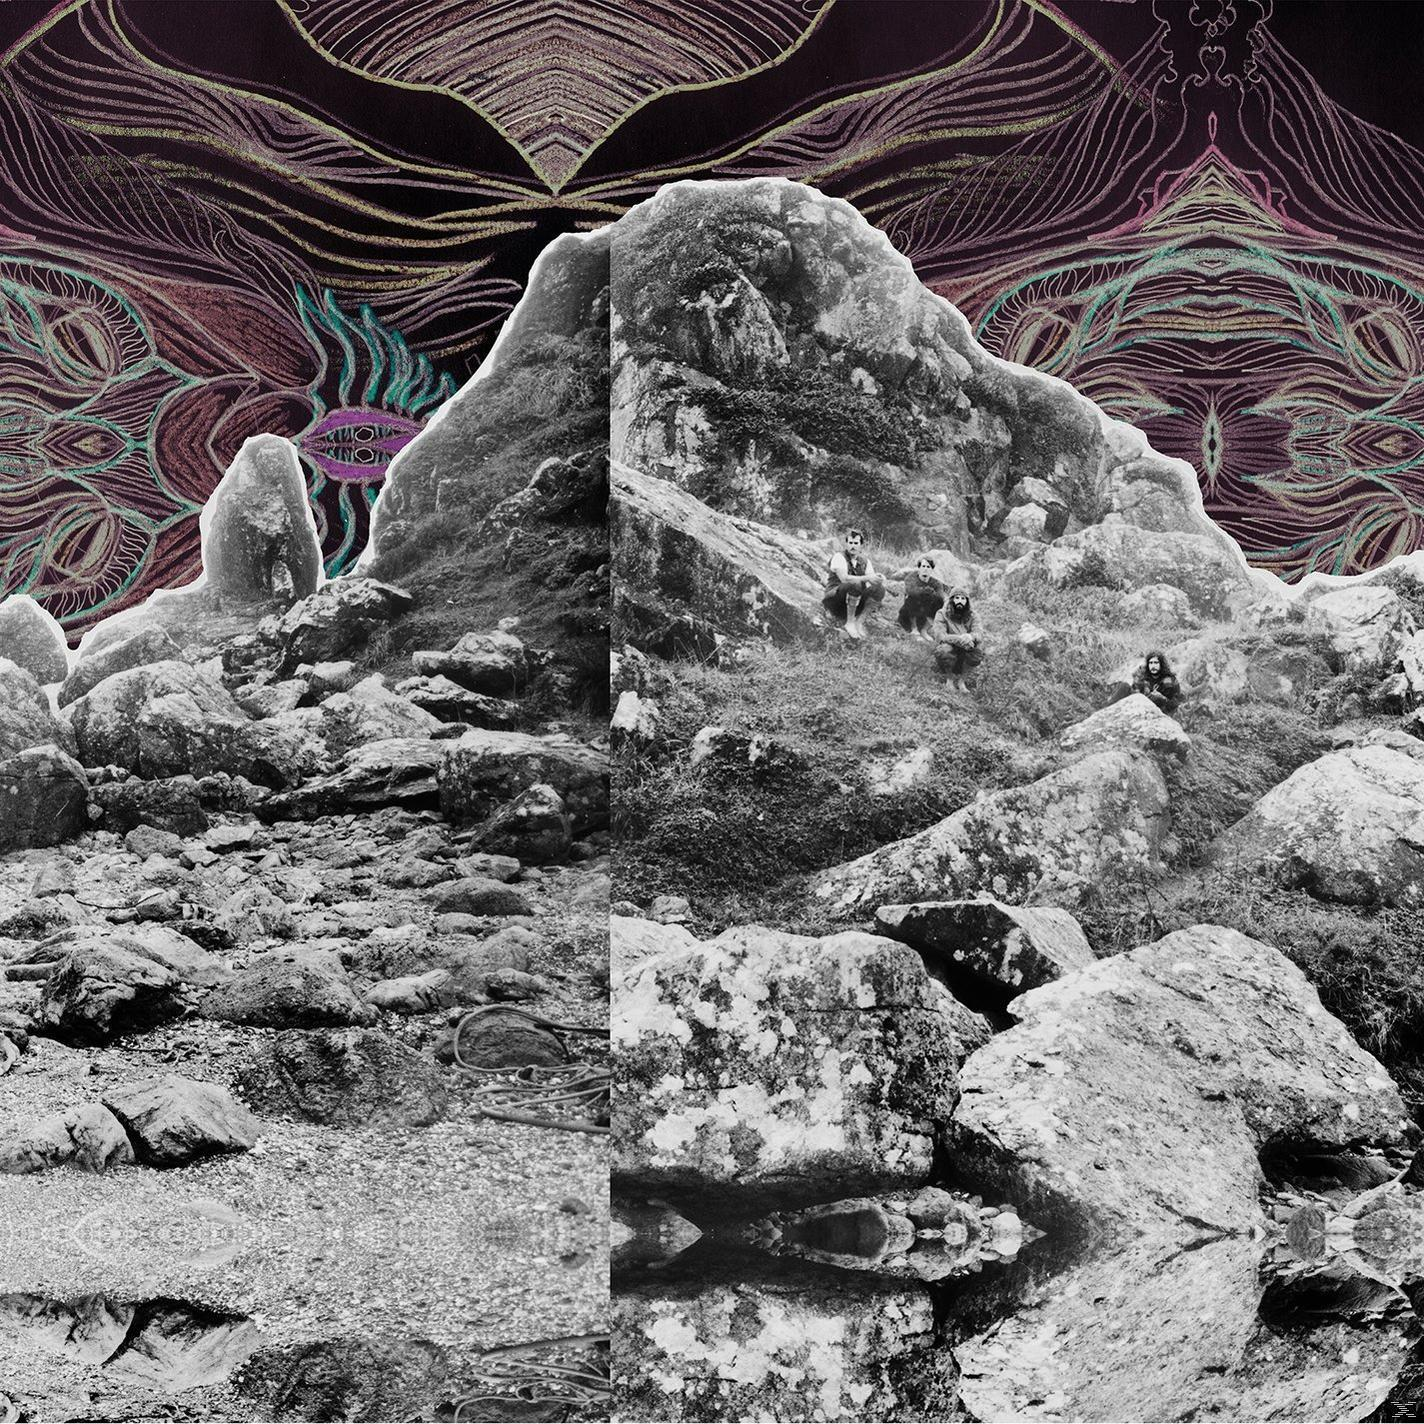 All Them Witches (CD) Surfer Meets His - - Dying Maker